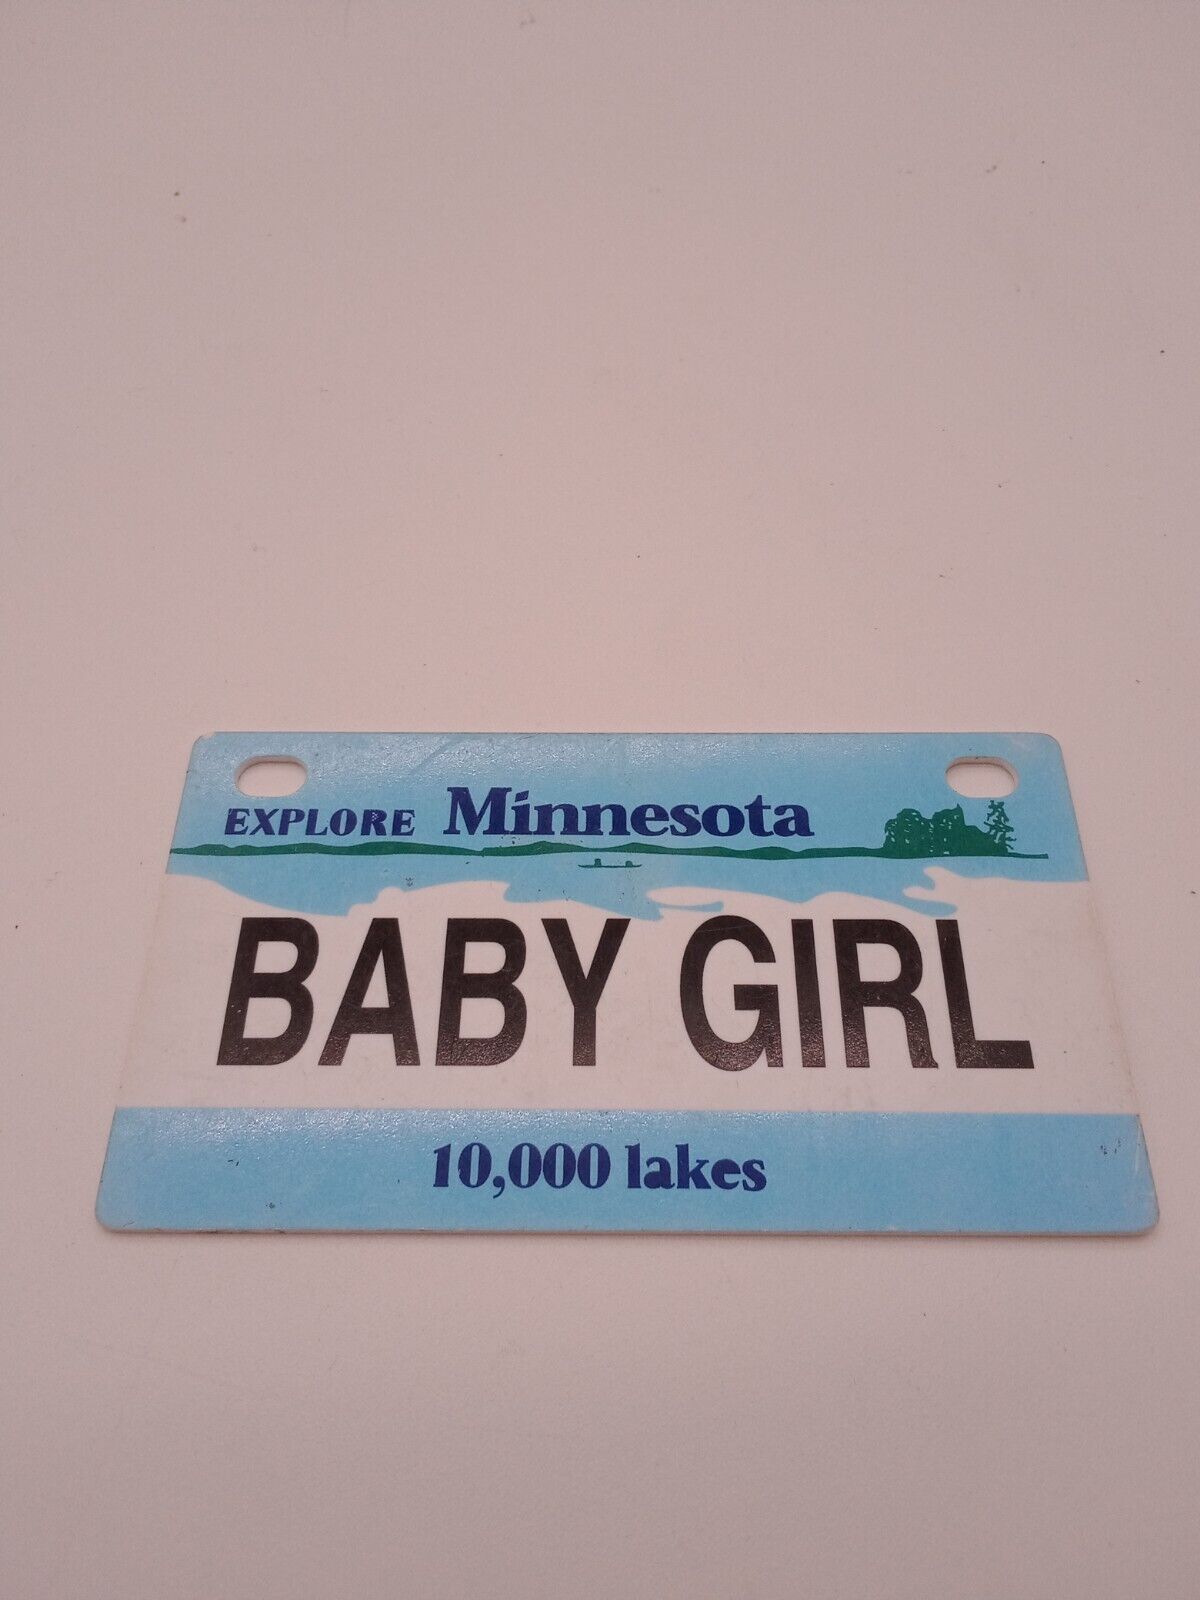 Baby Girl Minnesota State Novelty Mini Plastic License Plate Collector